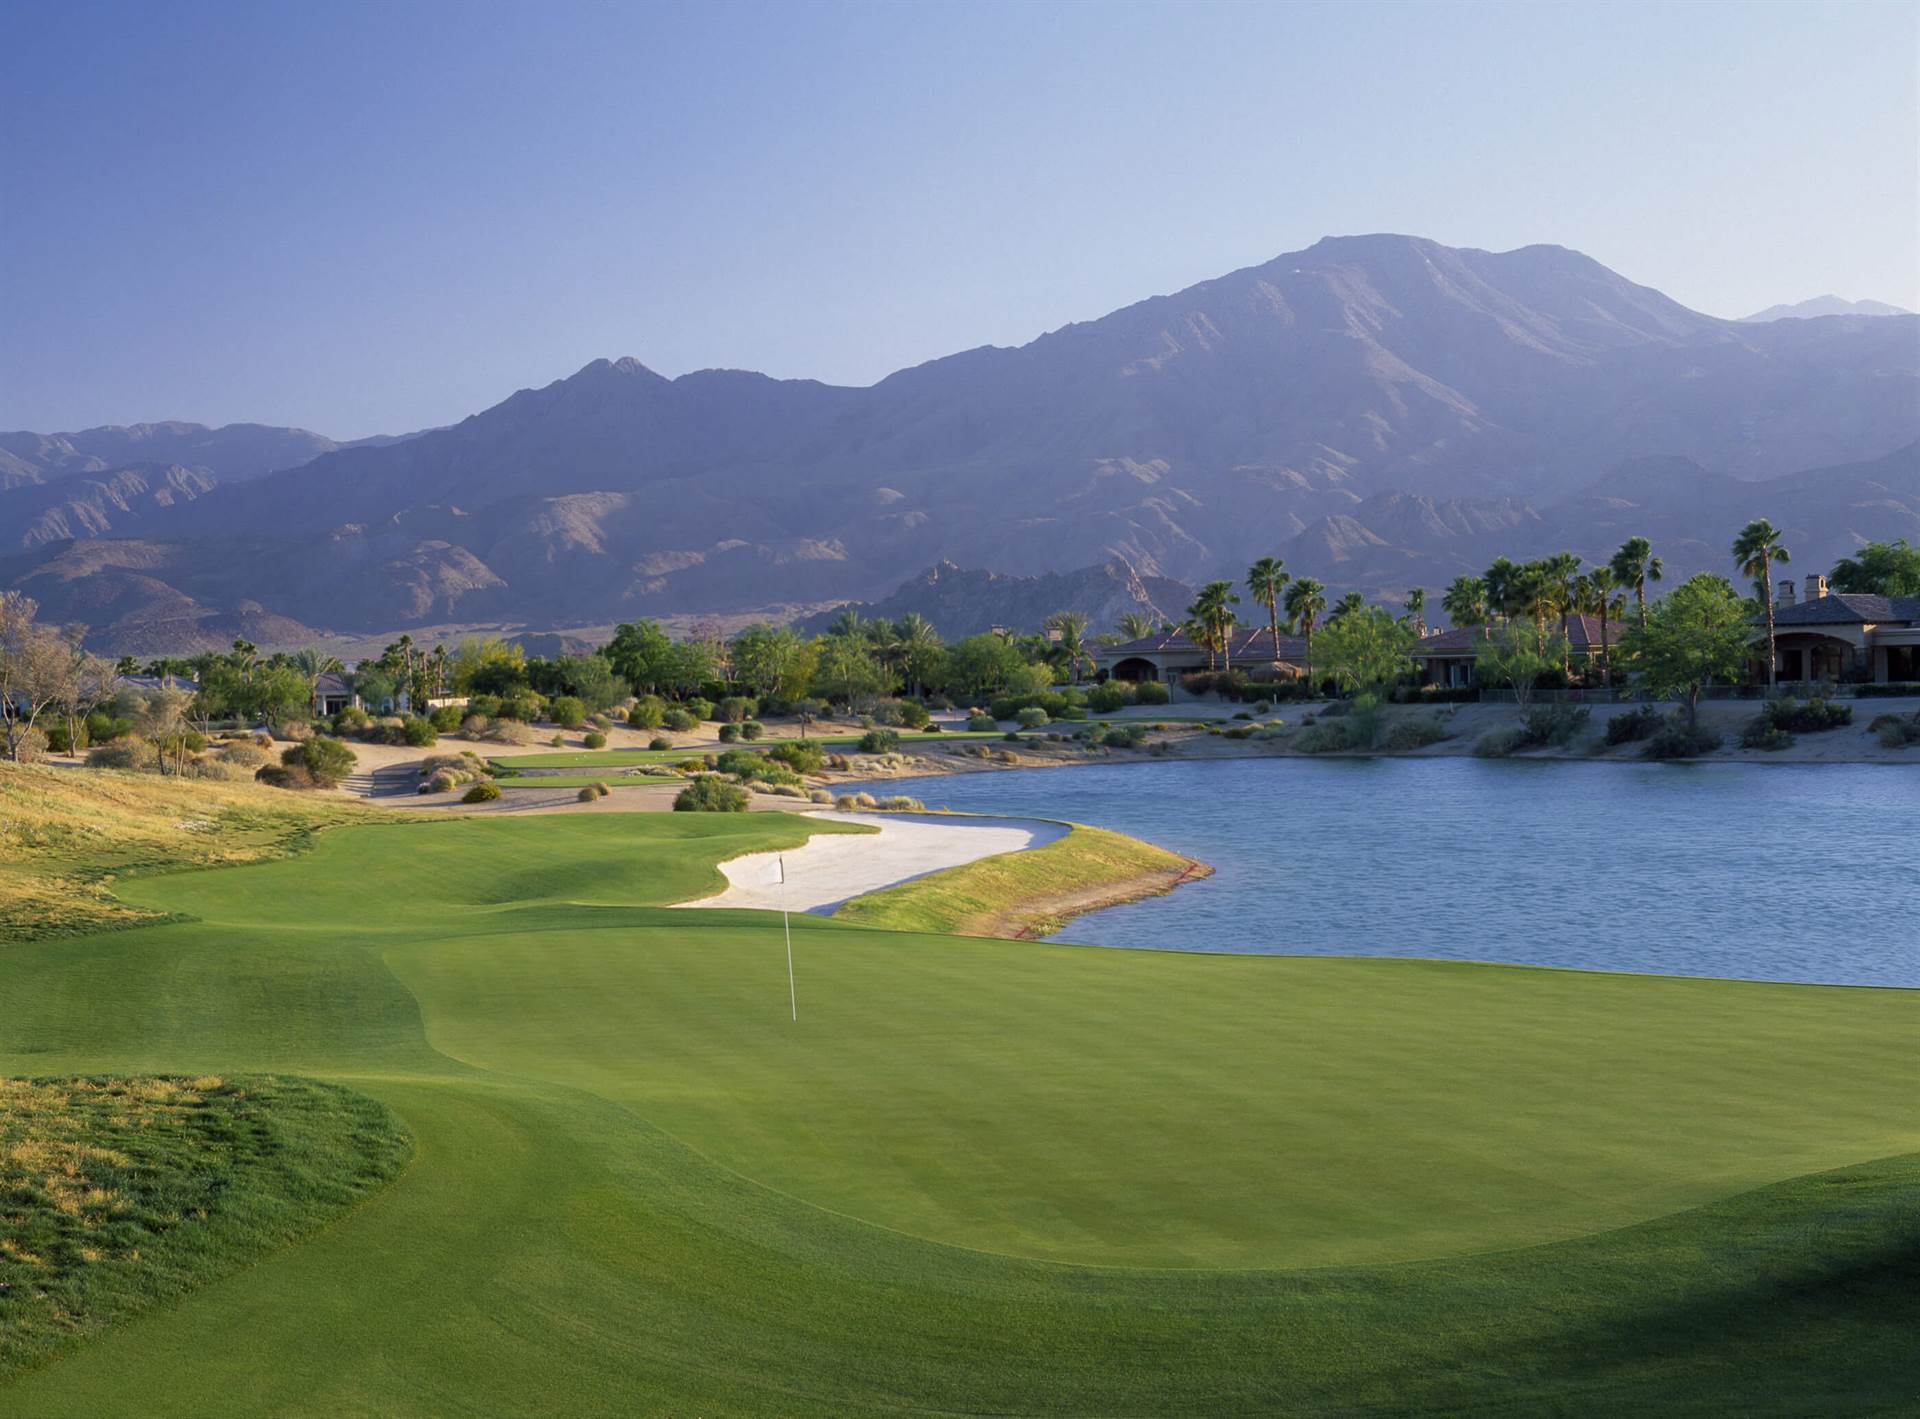 Greg Norman Course at PGA West